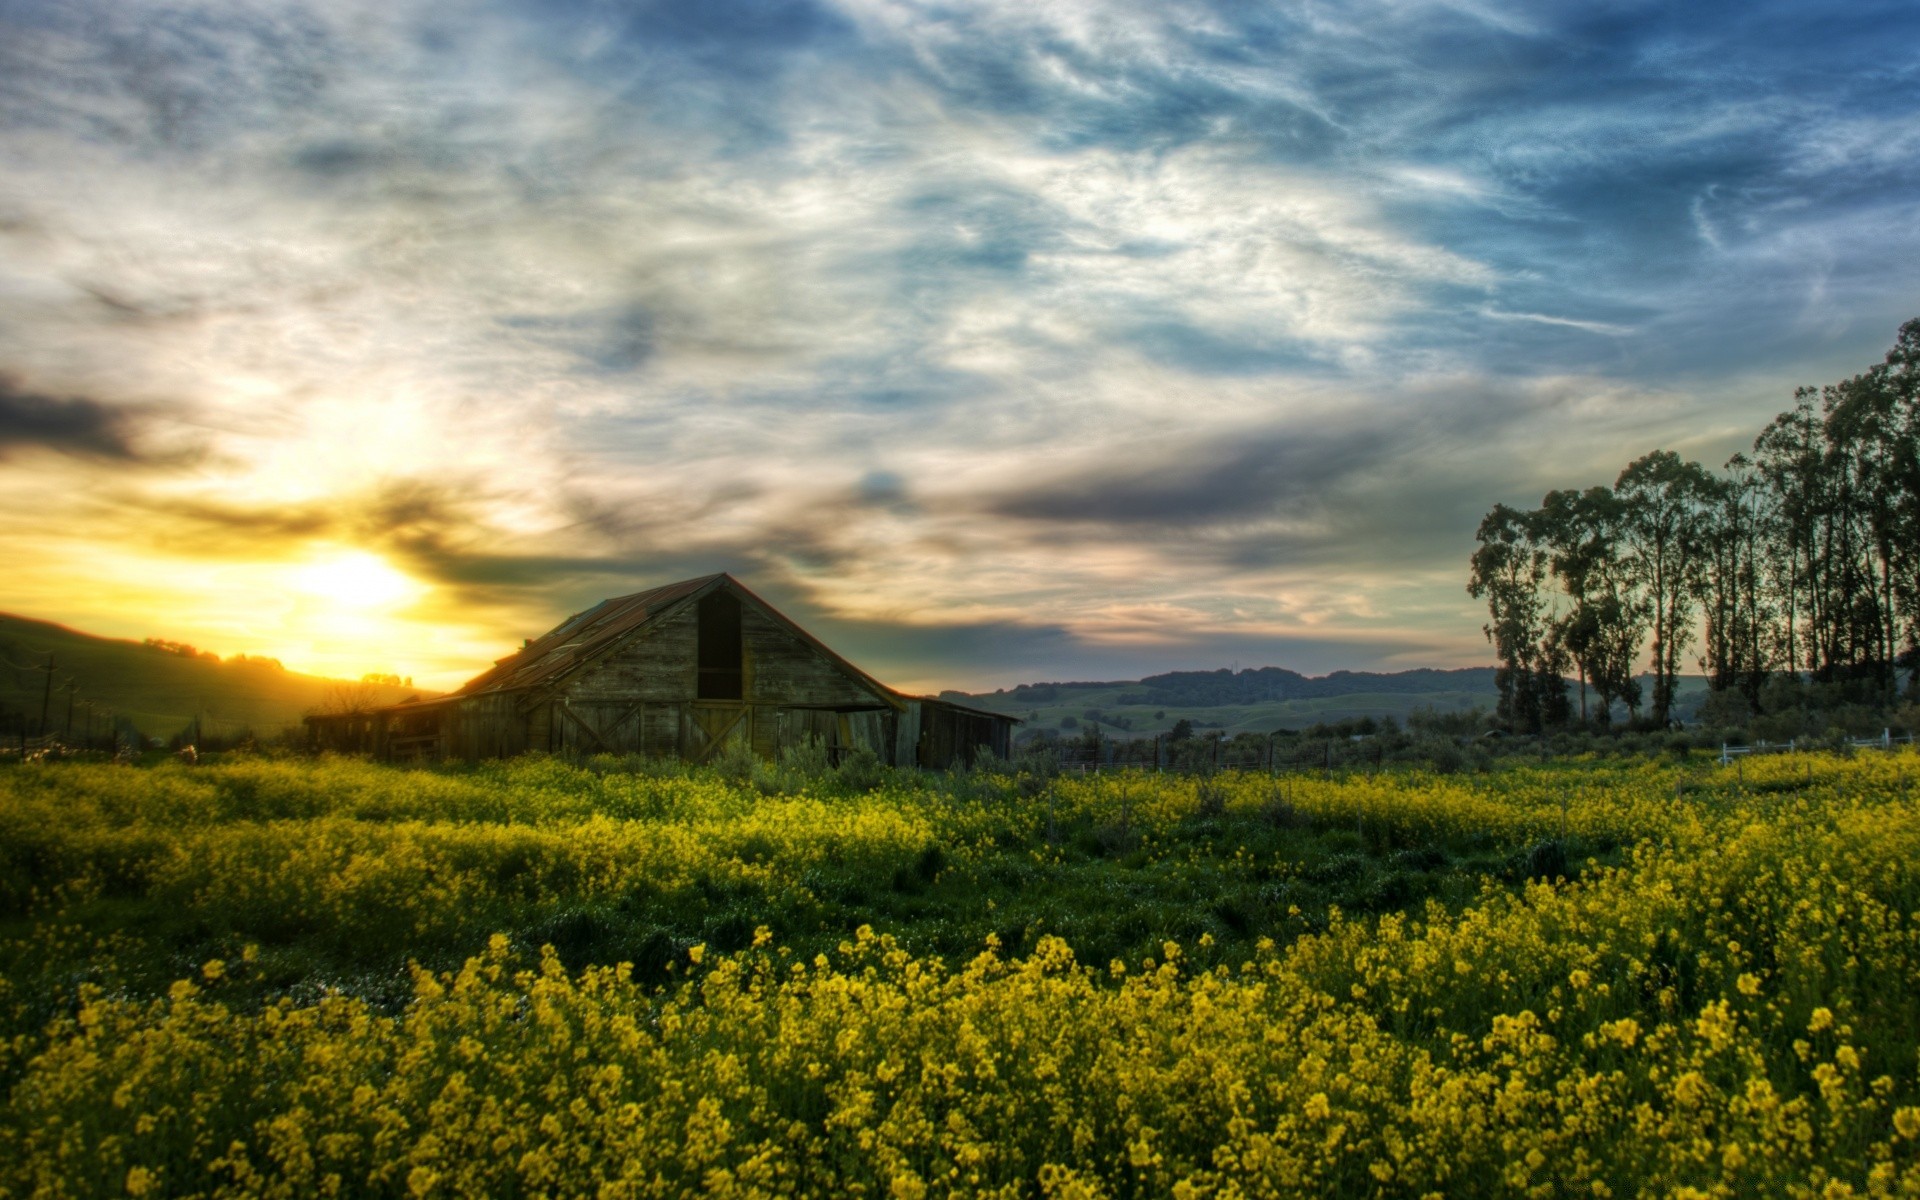 landscapes landscape agriculture field sky farm nature hayfield outdoors cloud rural scenic countryside tree grass country sunset crop cropland flower